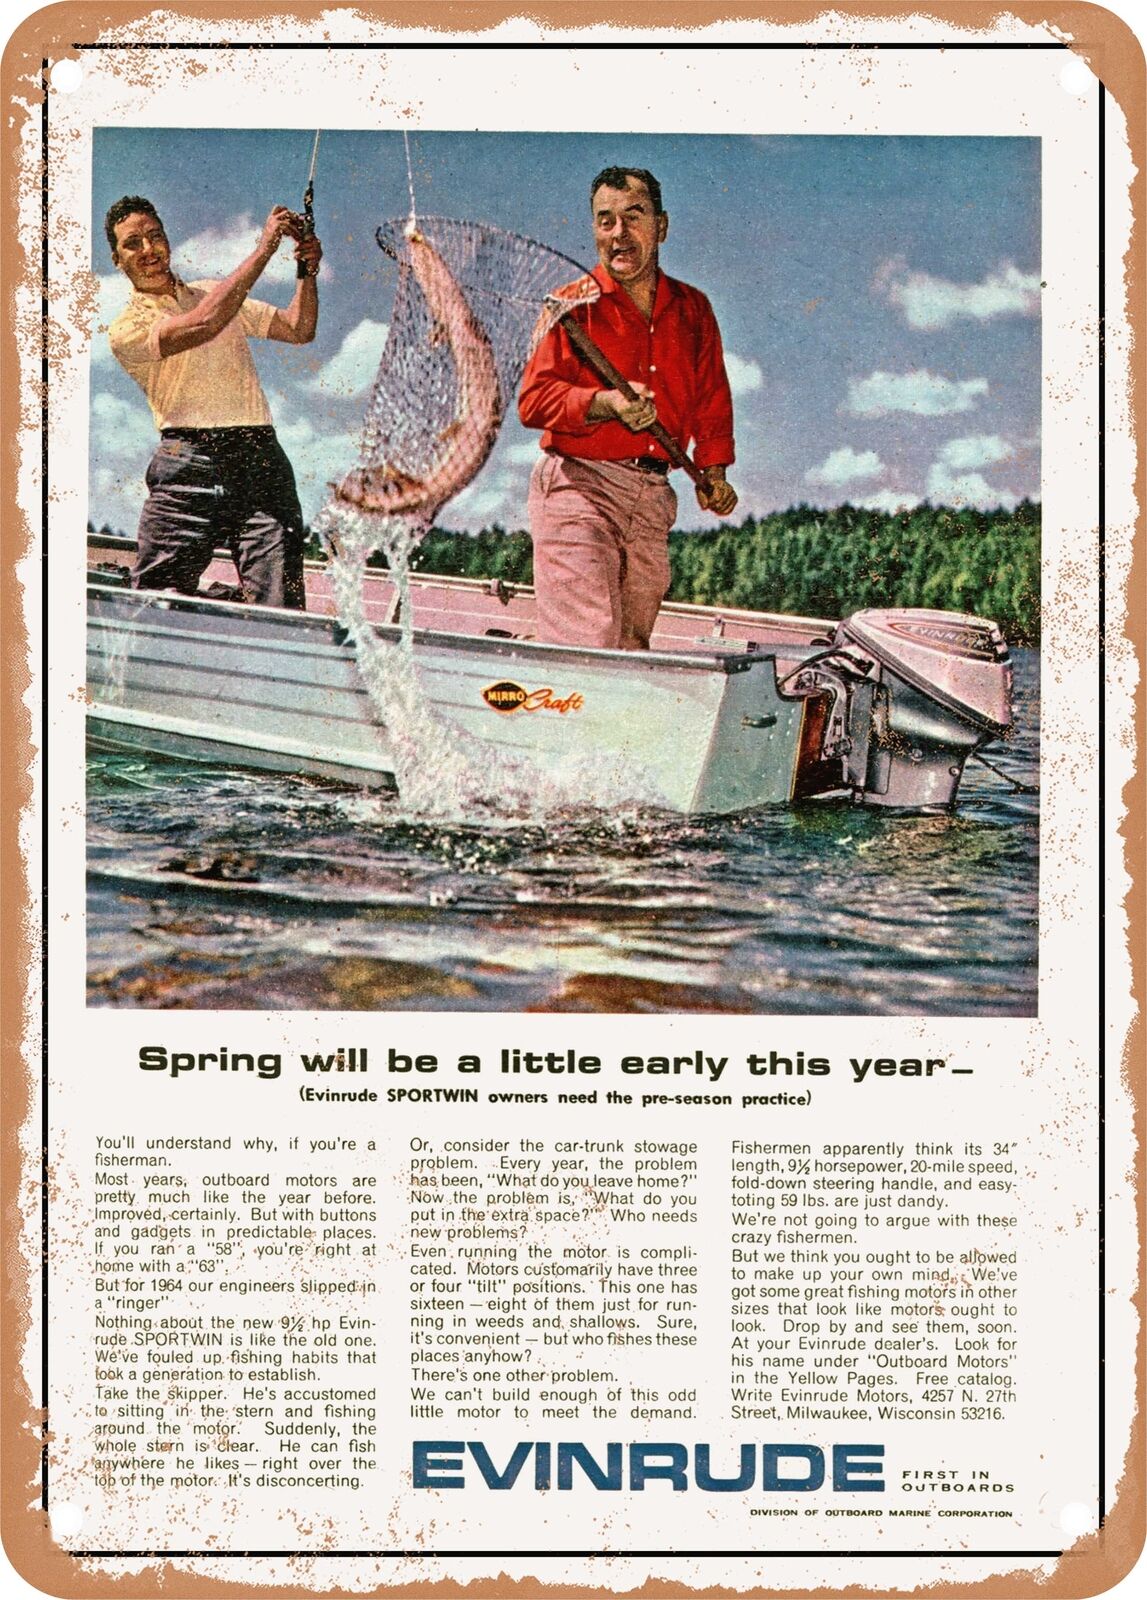 METAL SIGN - 1964 Evinrude Sportwin Owners Need the Pre Season Practice Evinrude